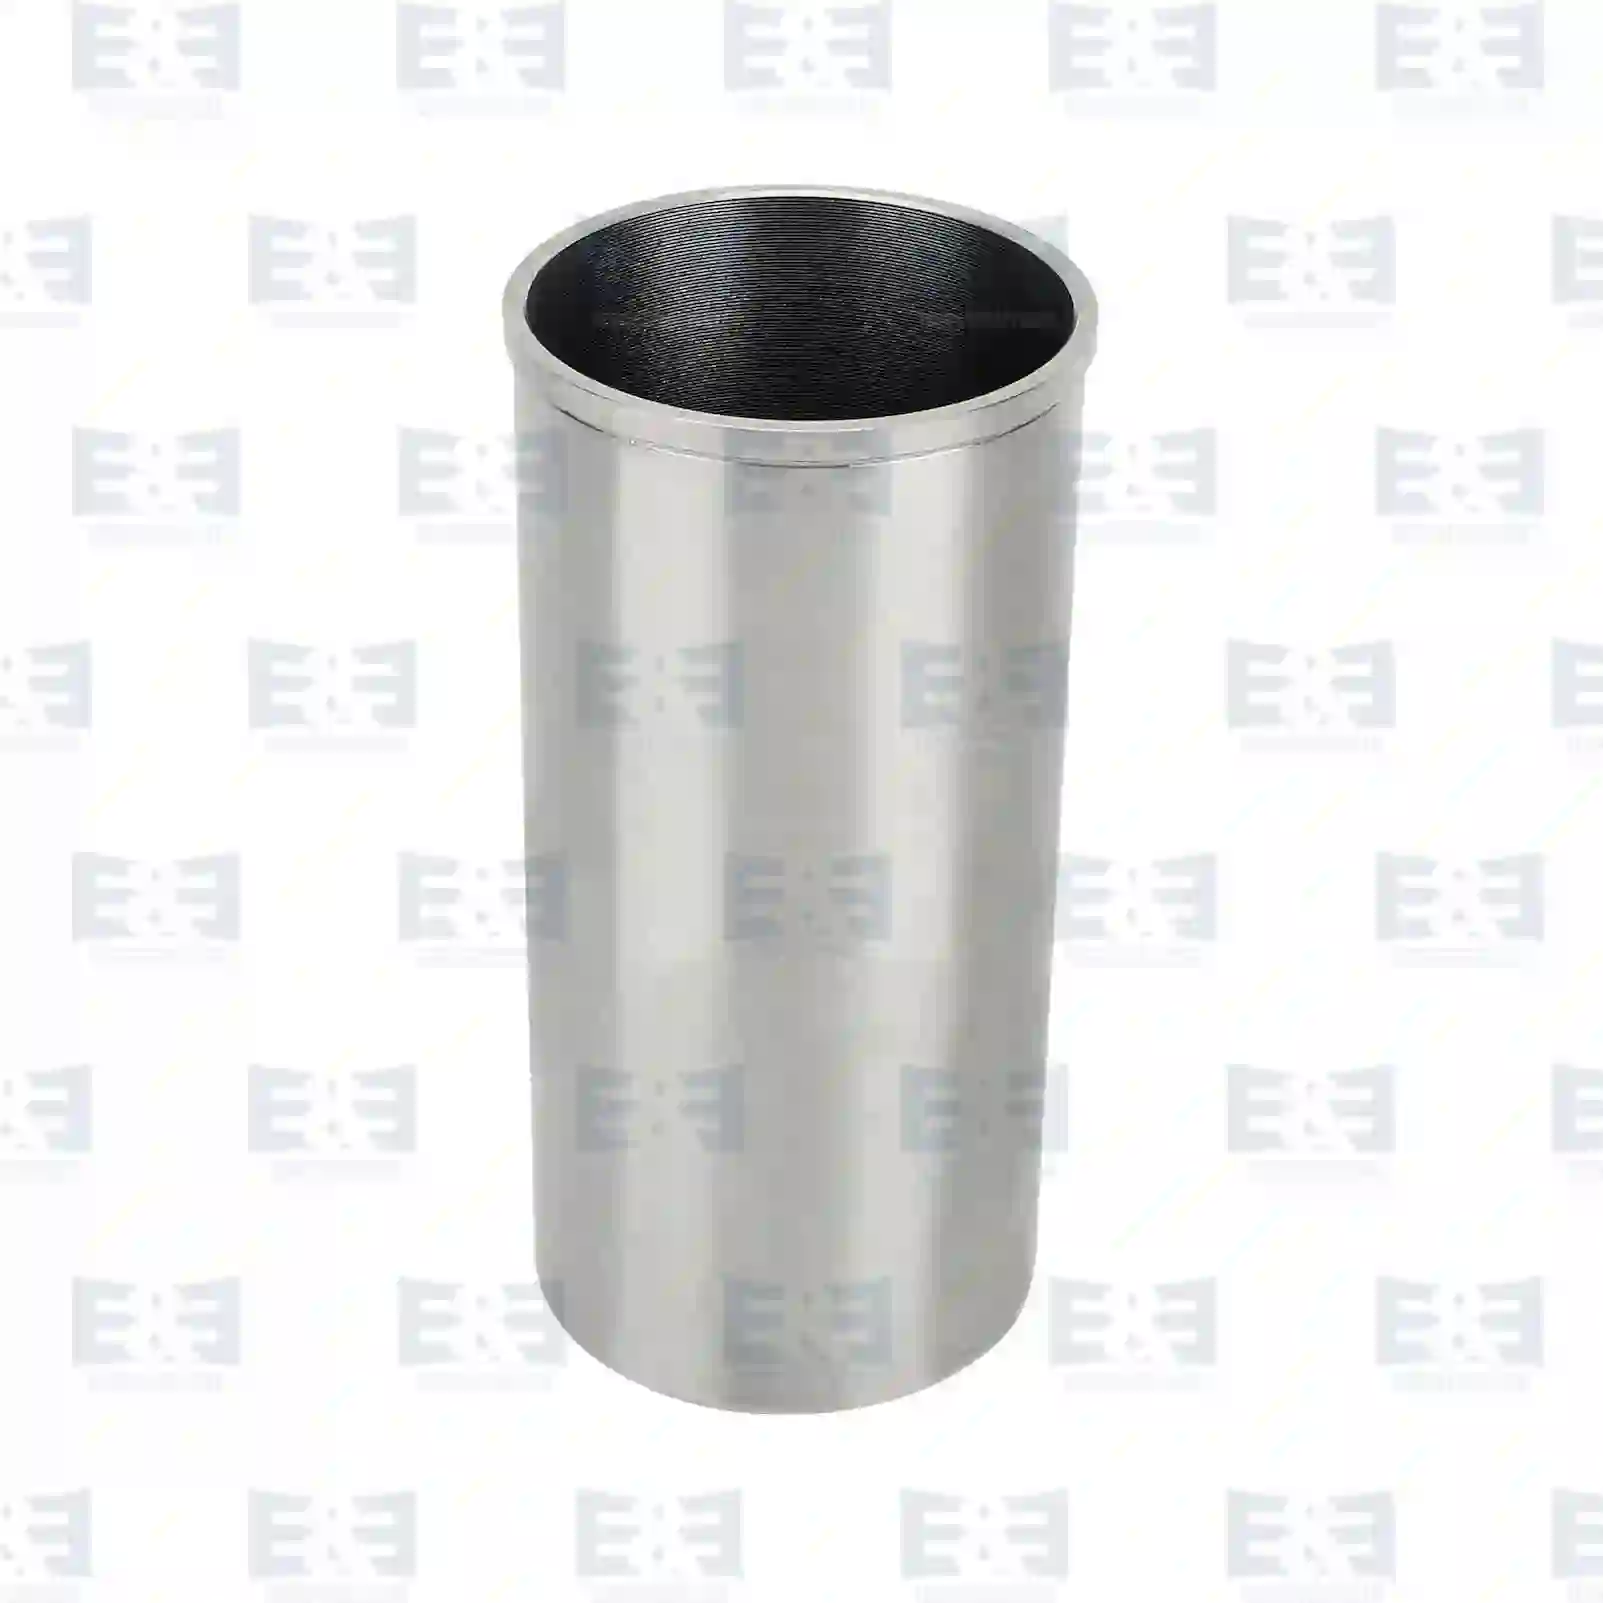 Cylinder liner, without seal rings, 2E2209128, 9060110110 ||  2E2209128 E&E Truck Spare Parts | Truck Spare Parts, Auotomotive Spare Parts Cylinder liner, without seal rings, 2E2209128, 9060110110 ||  2E2209128 E&E Truck Spare Parts | Truck Spare Parts, Auotomotive Spare Parts